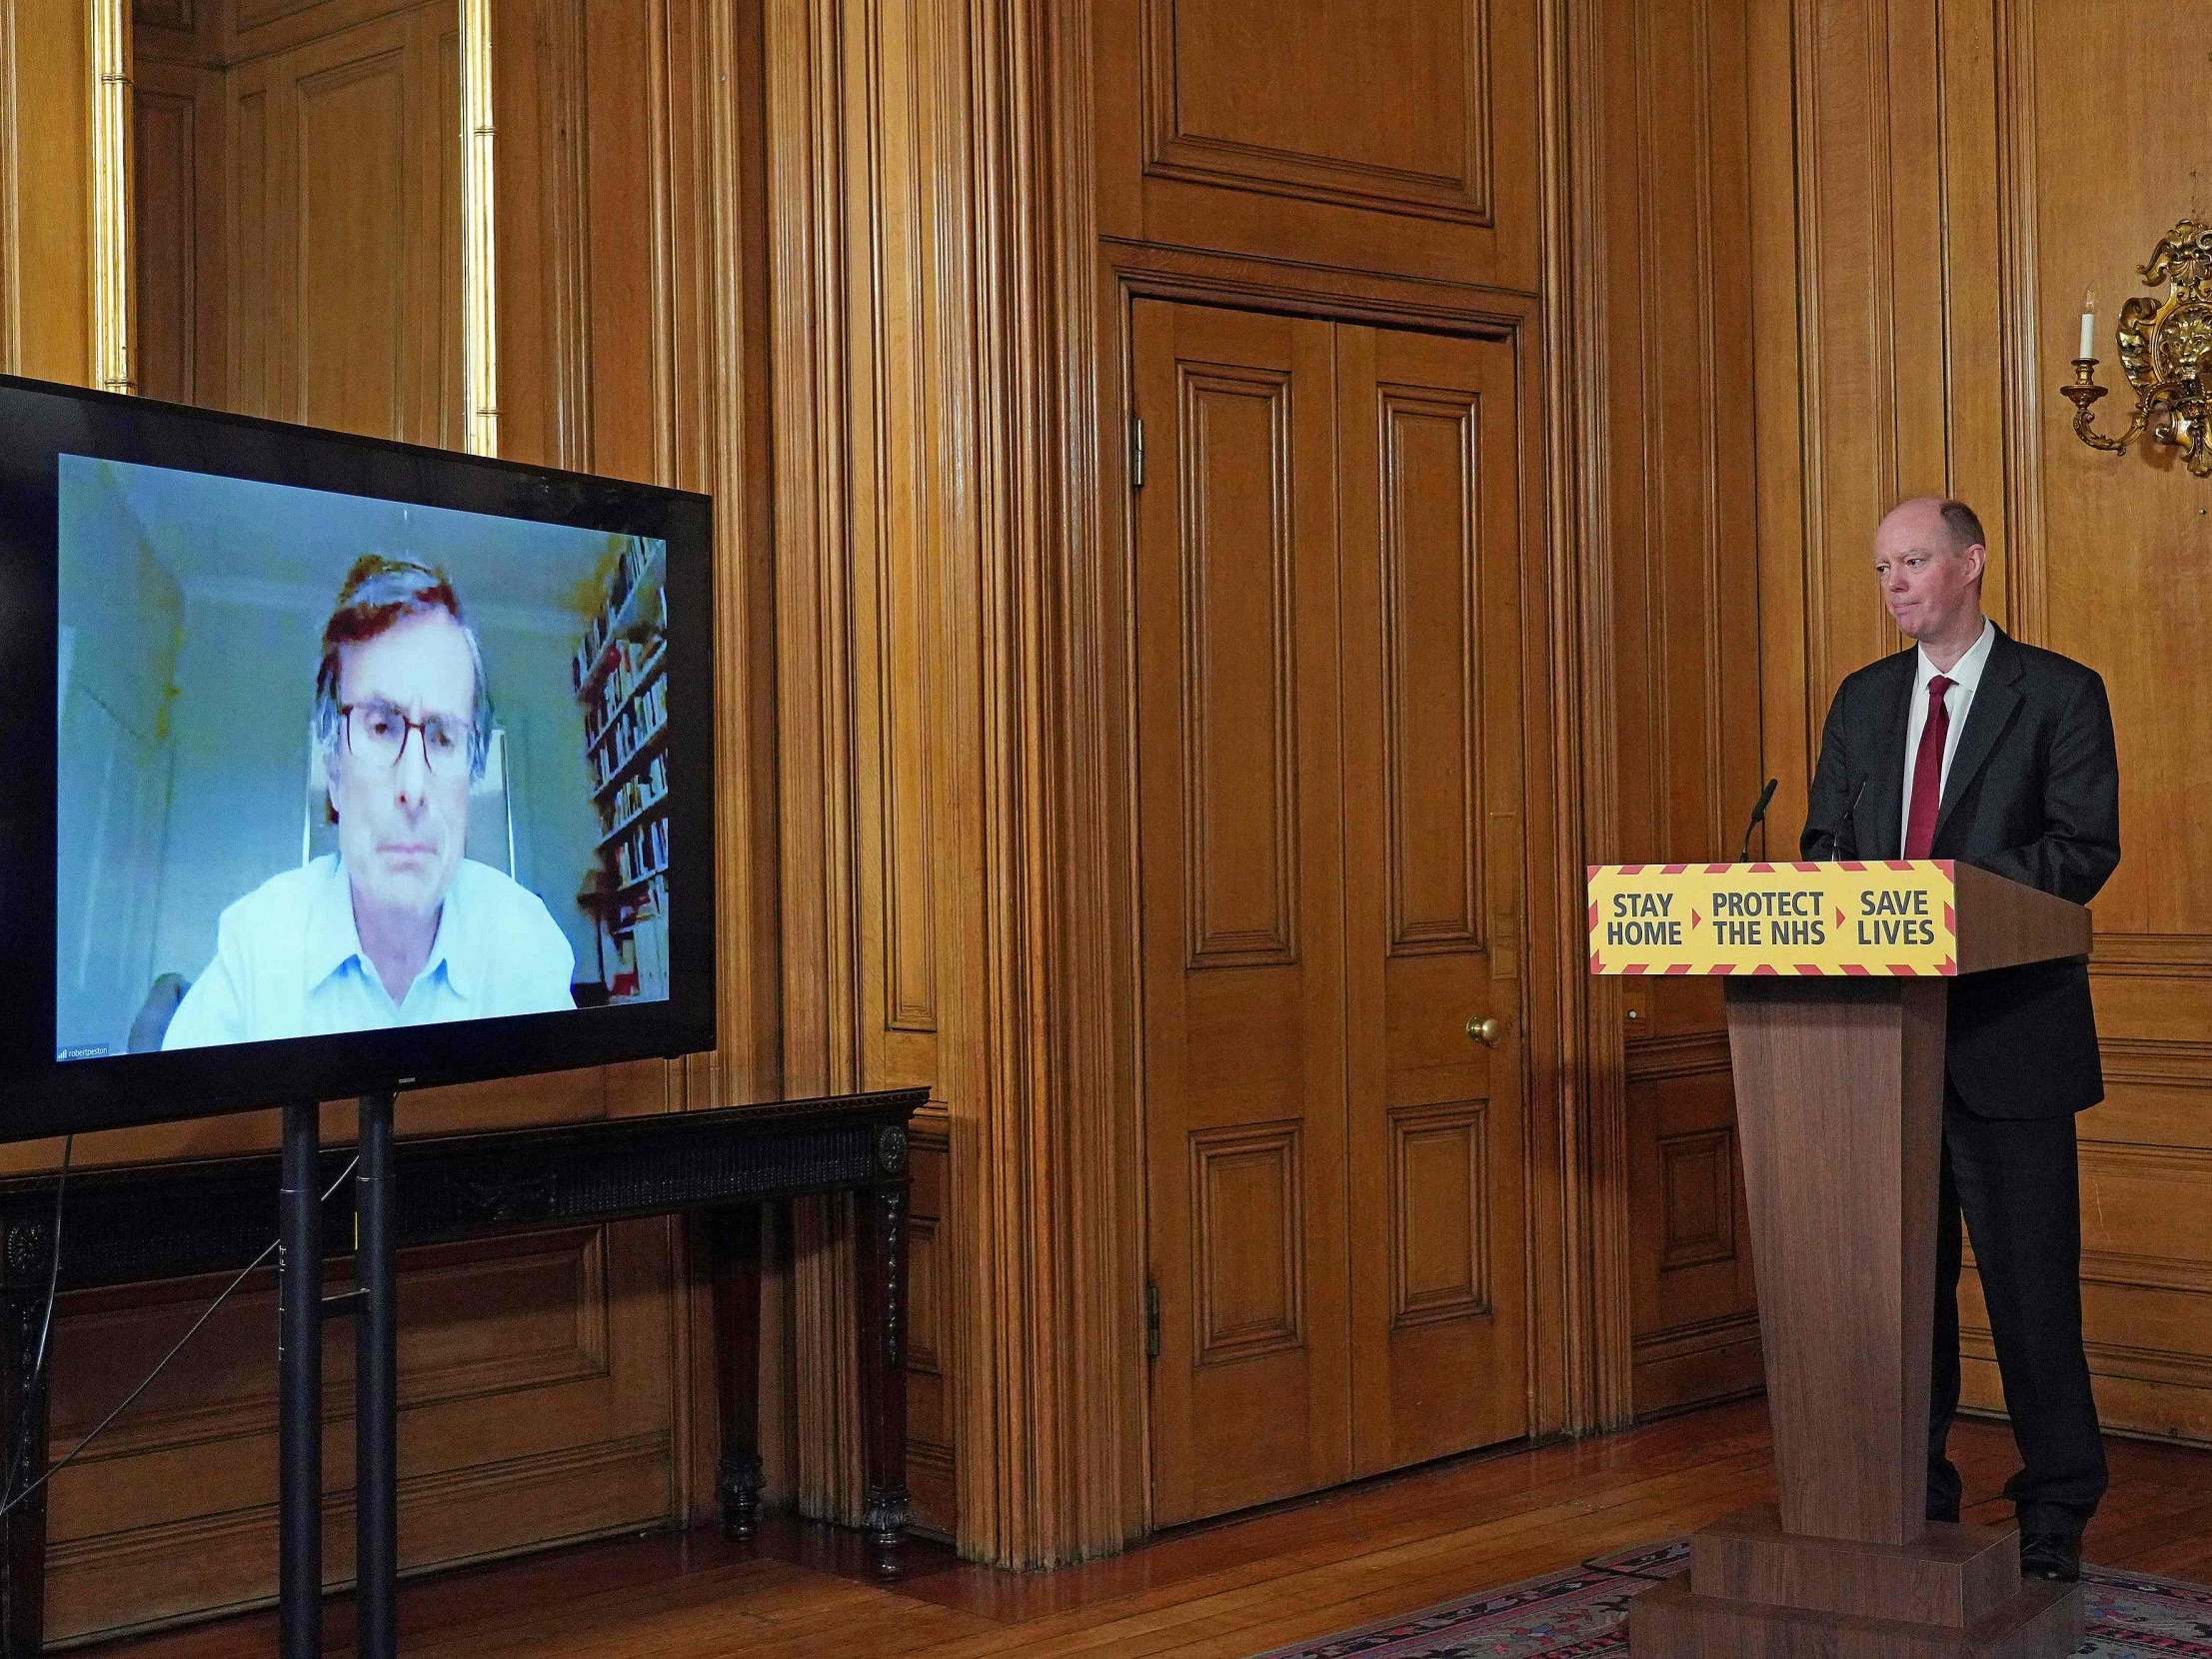 Chris Whitty, the chief medical officer, takes a question by video call from ITV’s Robert Peston during the daily press conference